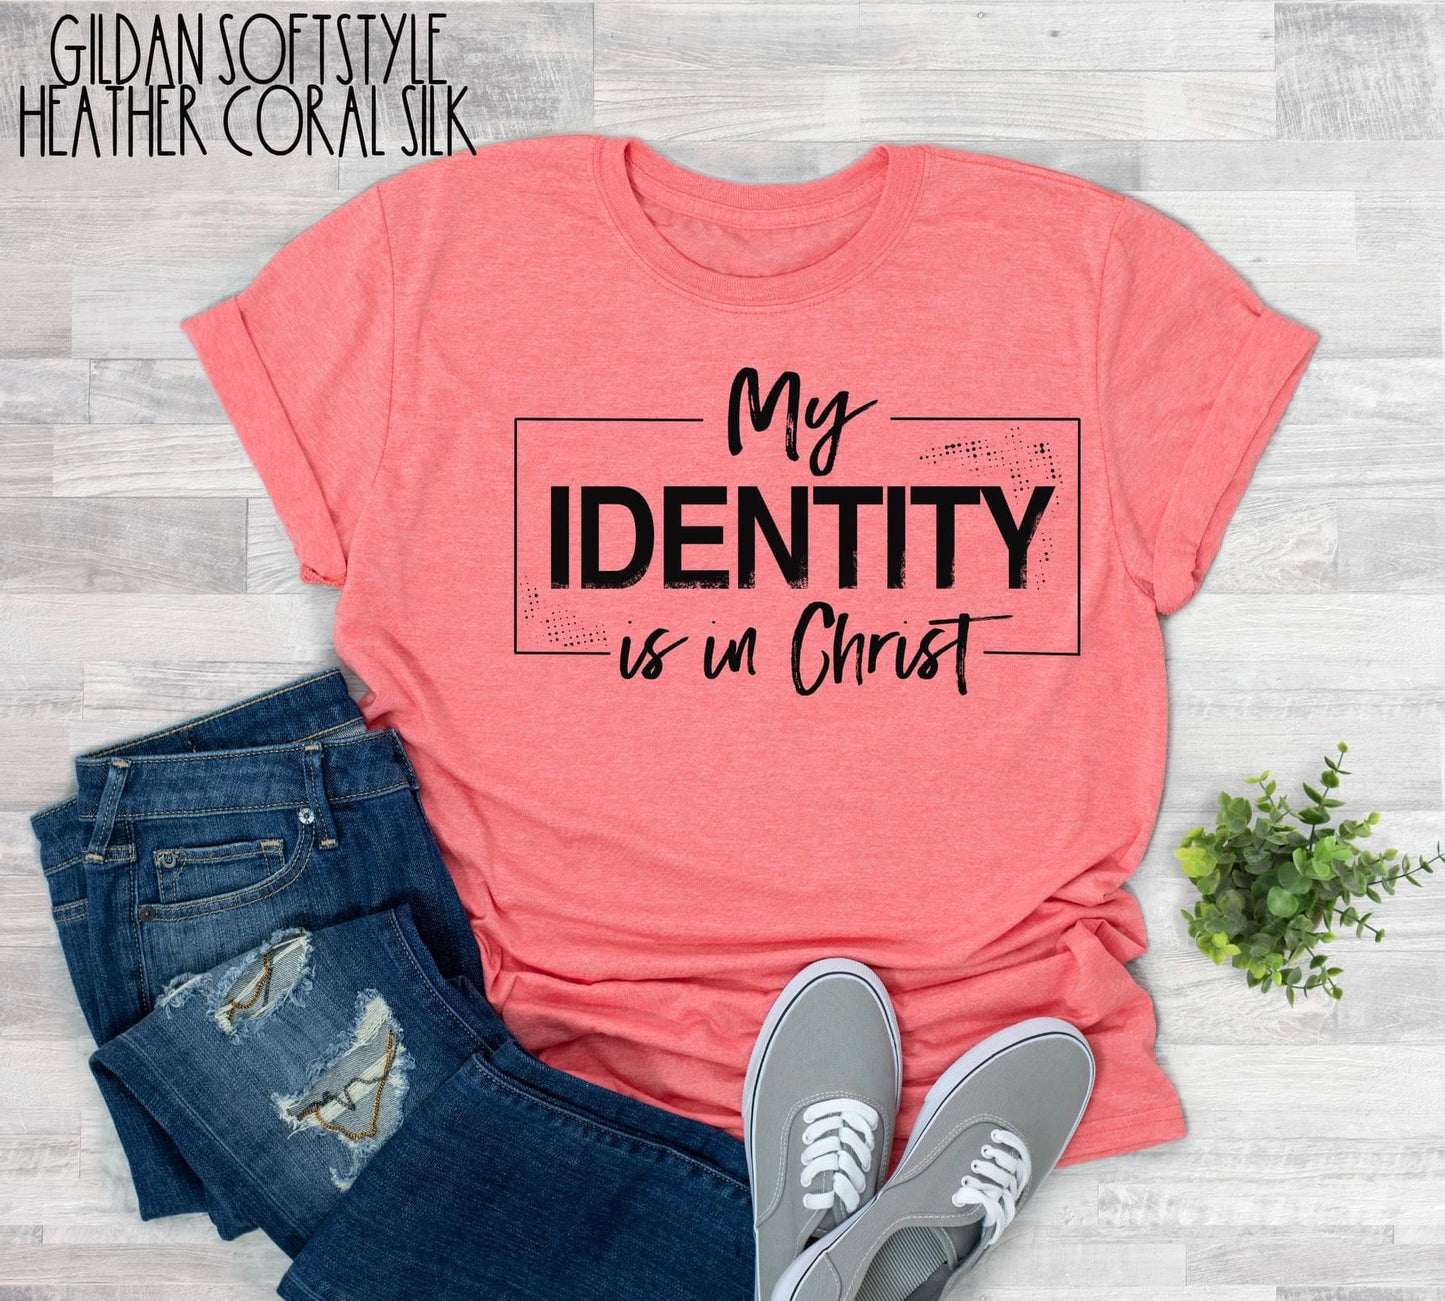 My Identity is in Christ